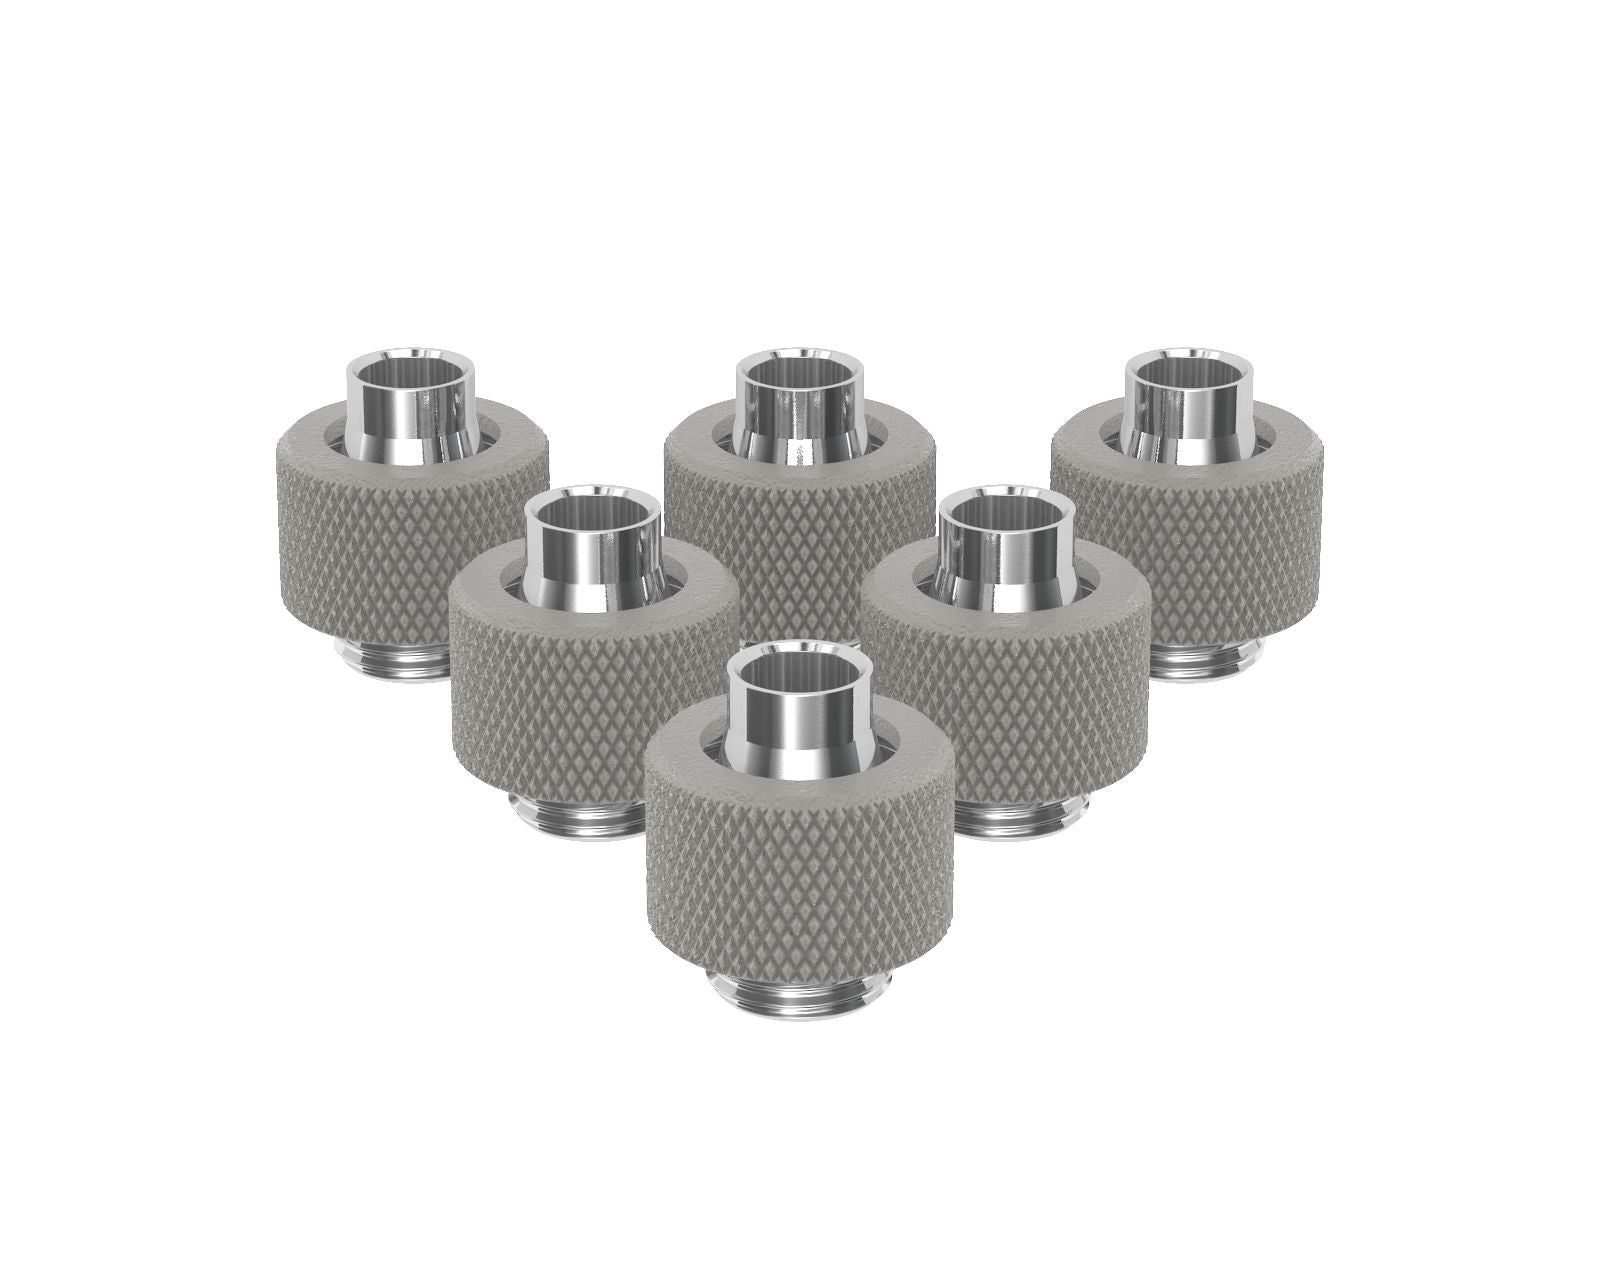 PrimoChill SecureFit SX - Premium Compression Fitting For 3/8in ID x 1/2in OD Flexible Tubing 6 Pack (F-SFSX12-6) - Available in 20+ Colors, Custom Watercooling Loop Ready - TX Matte Silver